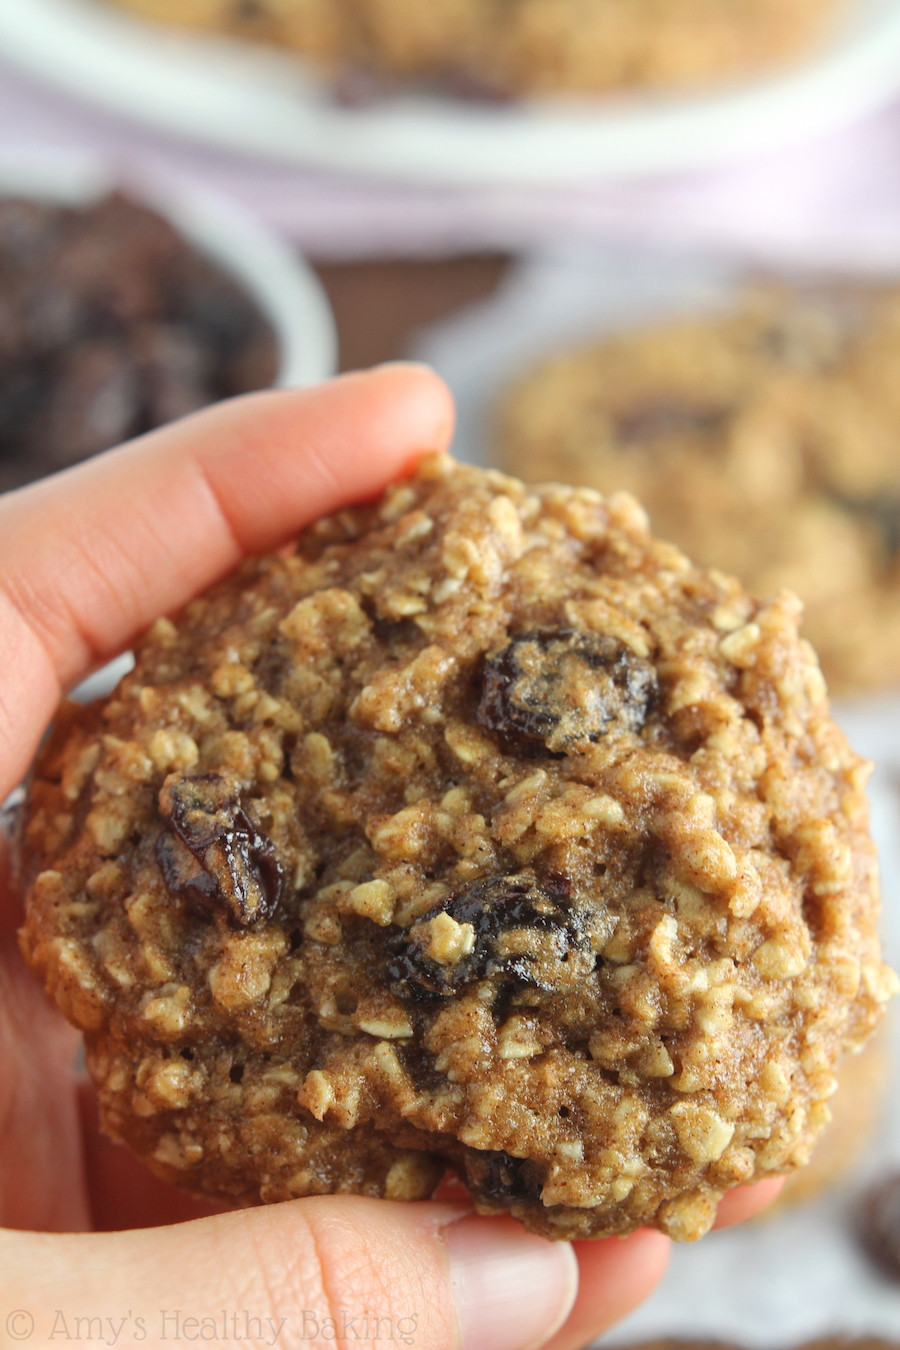 Oatmeal Cookies Recipe Healthy
 The Ultimate Healthy Soft & Chewy Oatmeal Raisin Cookies